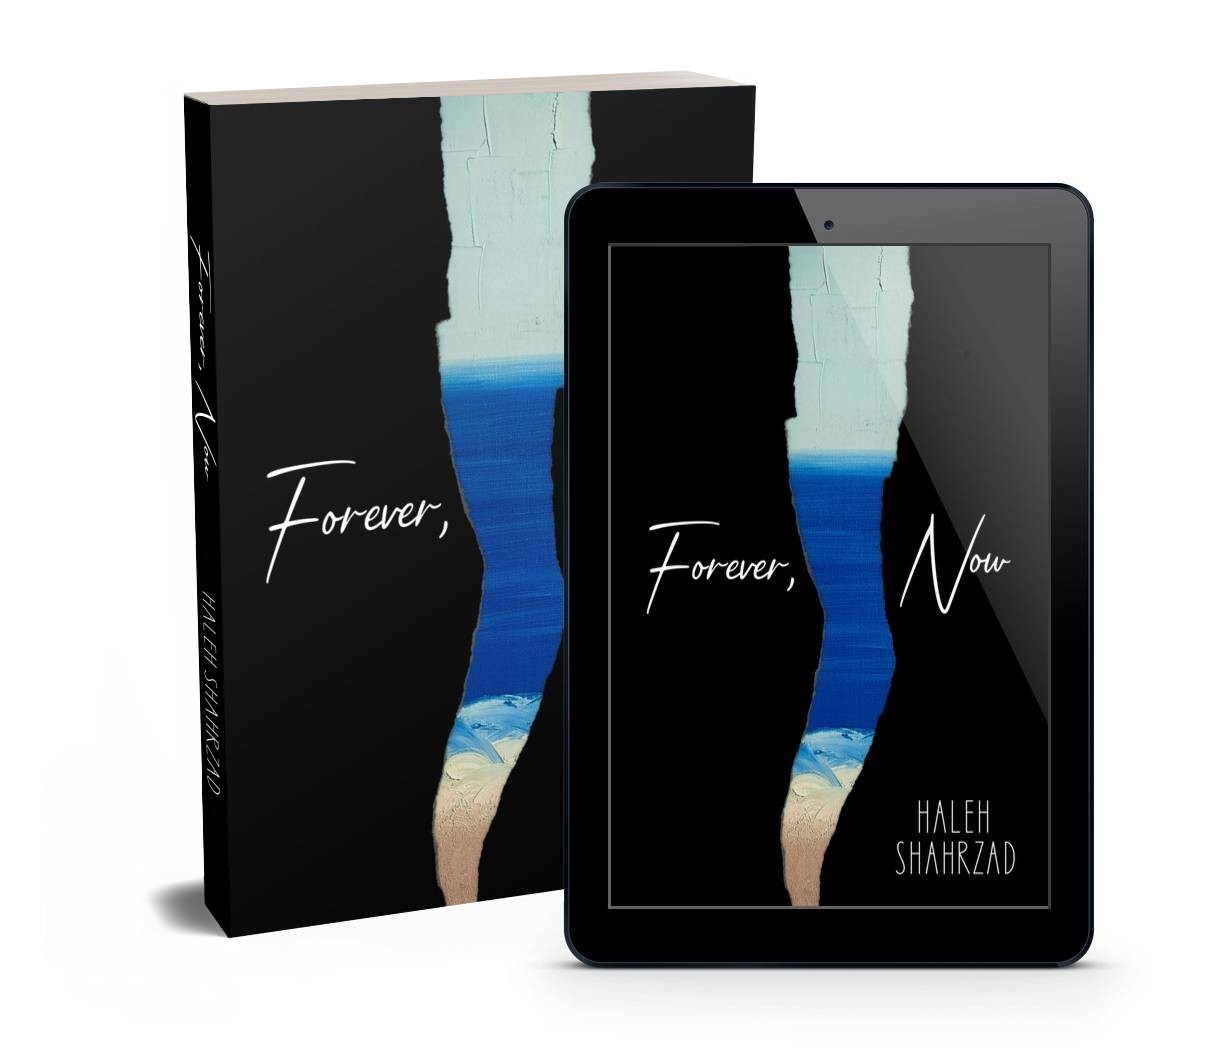 Forever, Now book and kindle image